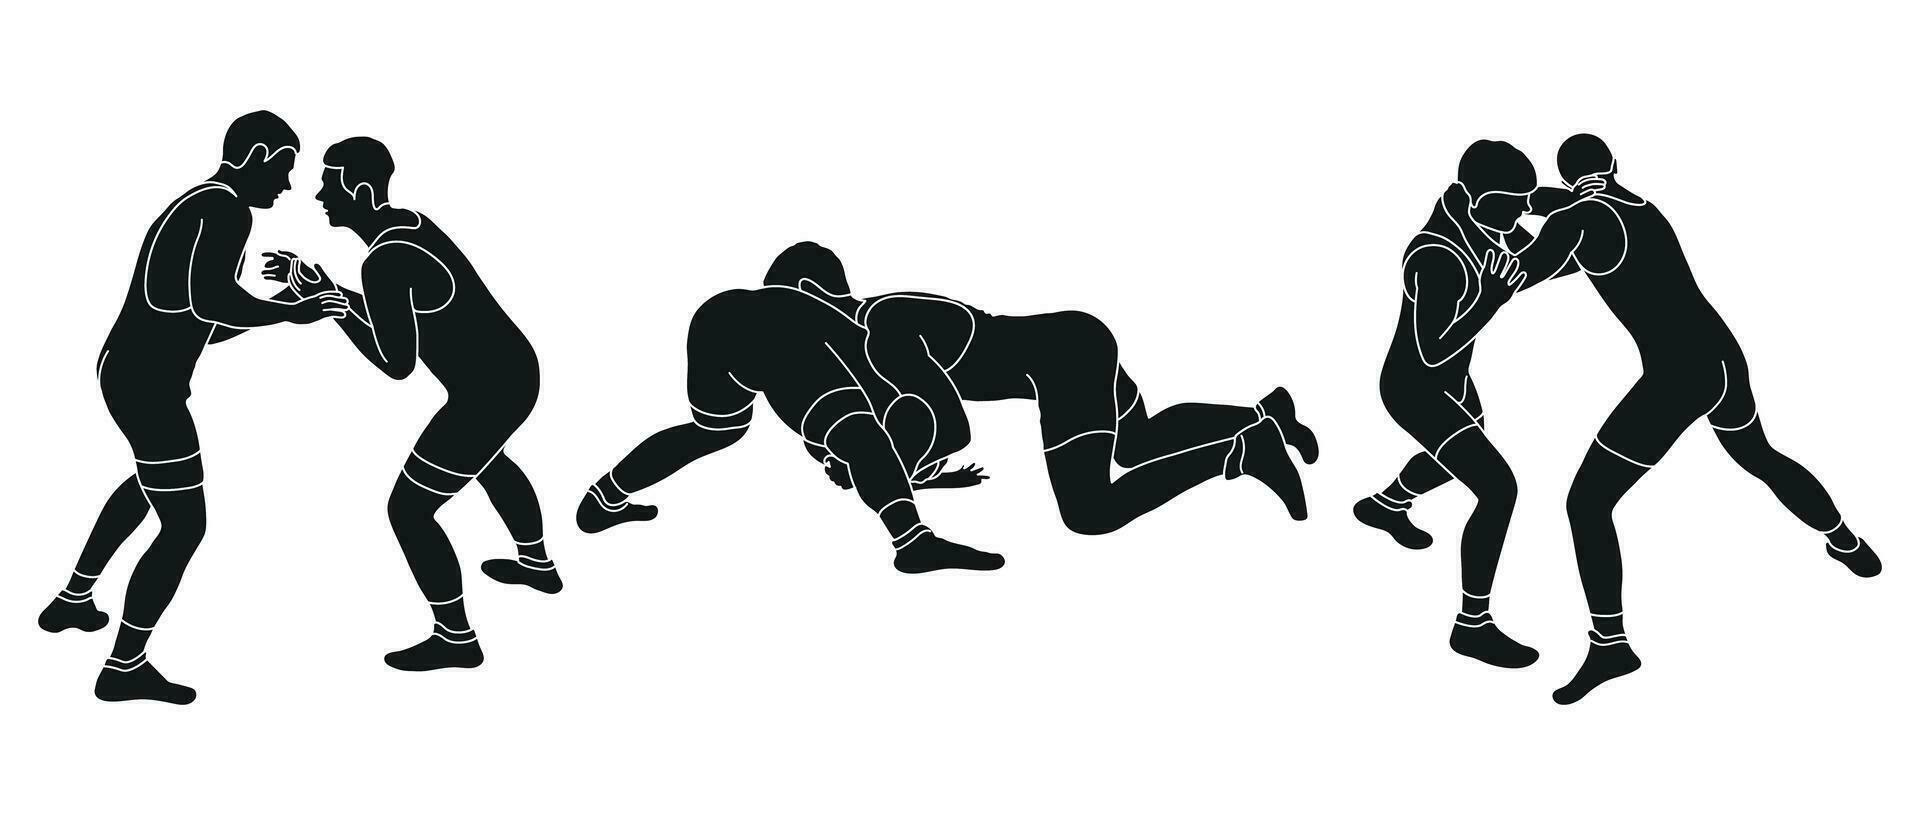 Line sketch of silhouettes athletes wrestler in wrestling, fighting. Greco Roman wrestling, fight, combating, struggle, grappling, duel, mixed martial art, sportsmanship vector